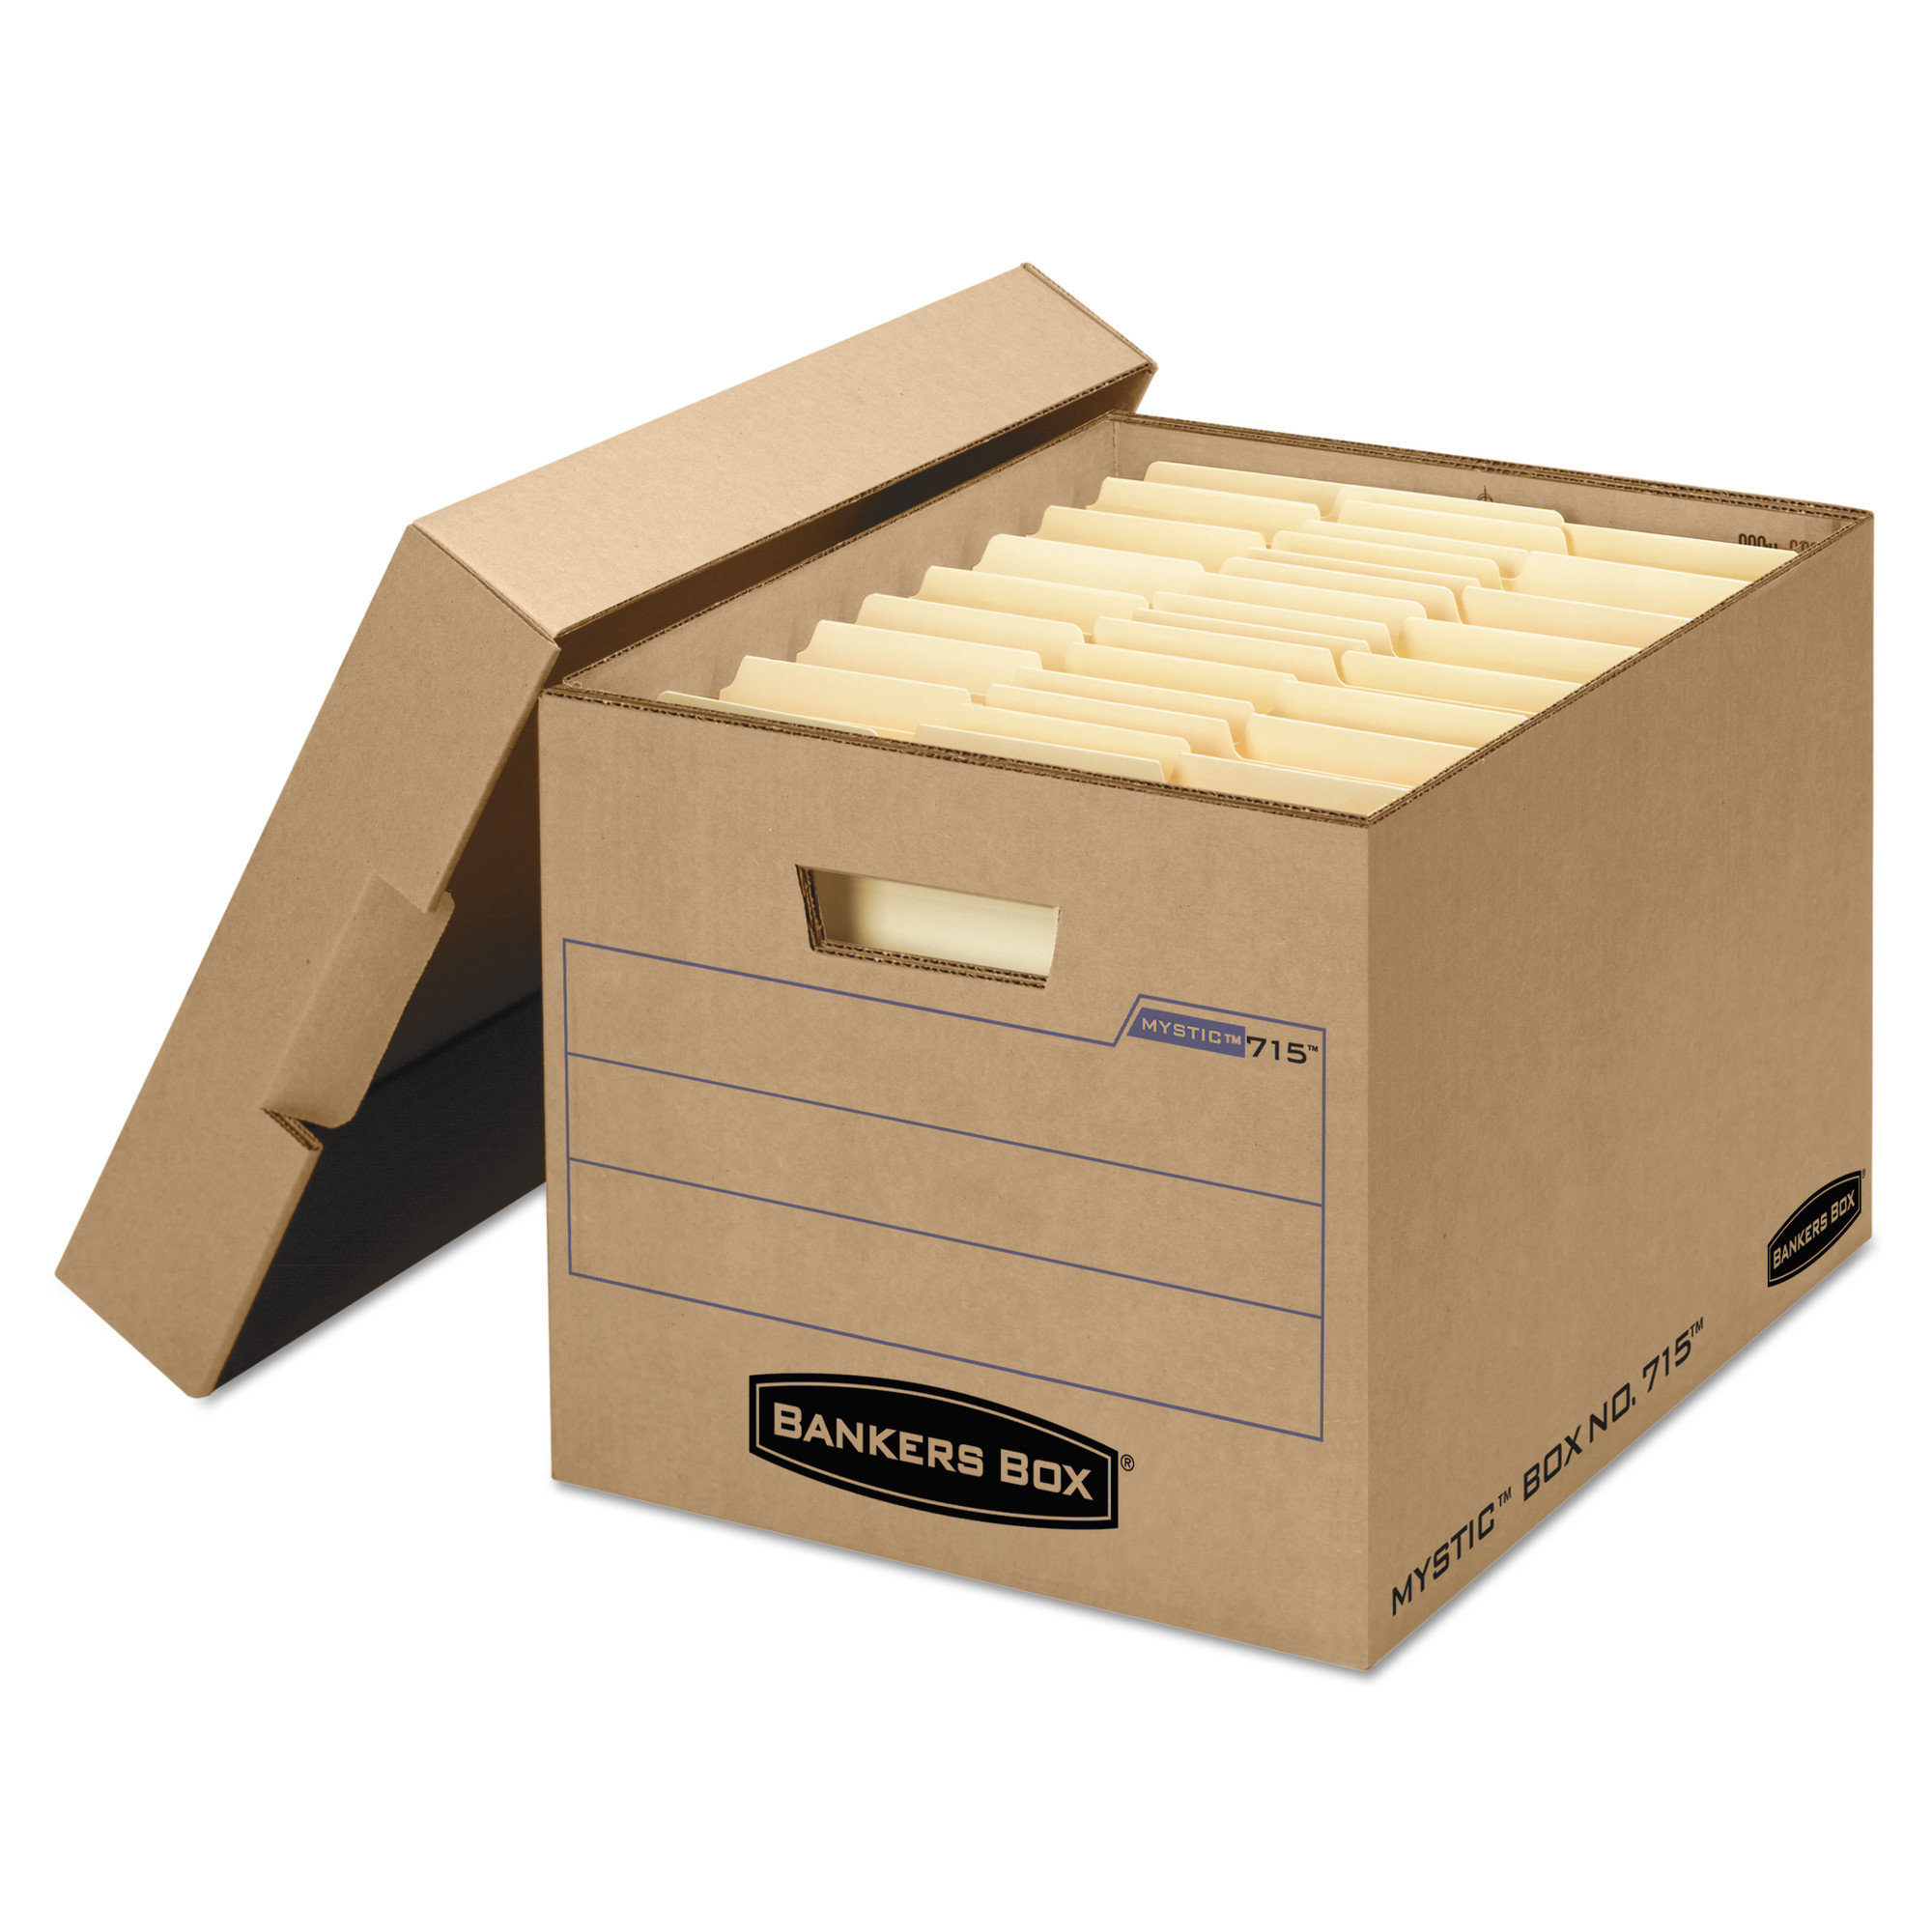 BANKERS BOX Filing Storage Box with Locking Lid, Letter/Legal